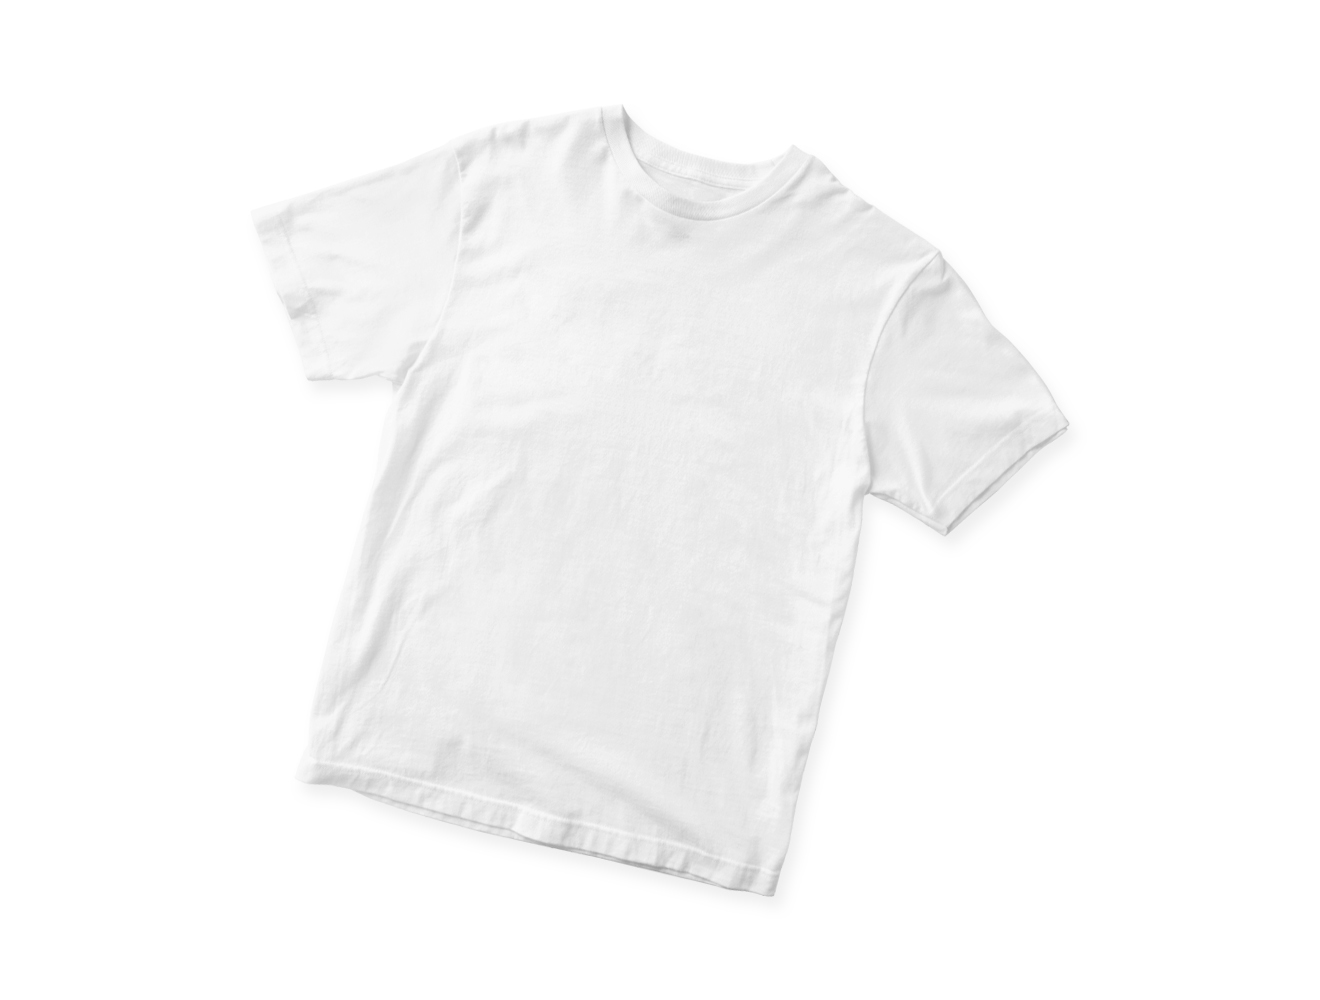 Sublimation T-Shirt for Adults size M - White